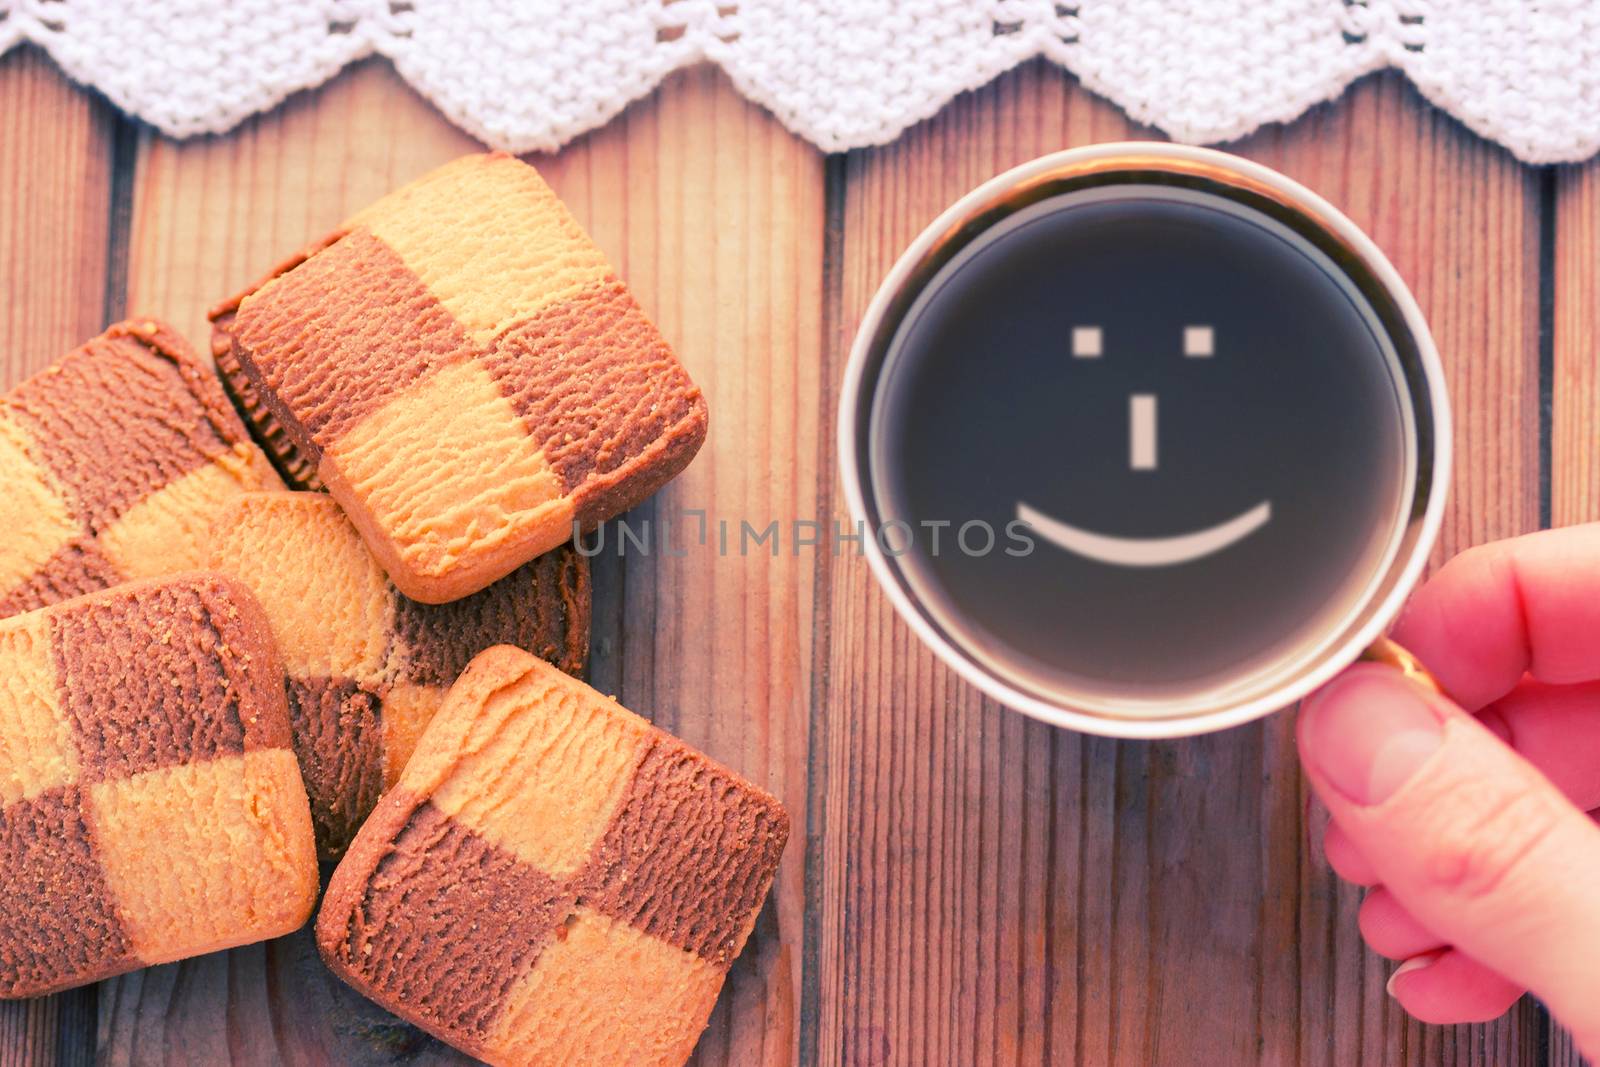 Good morning coffee smile cup by liwei12